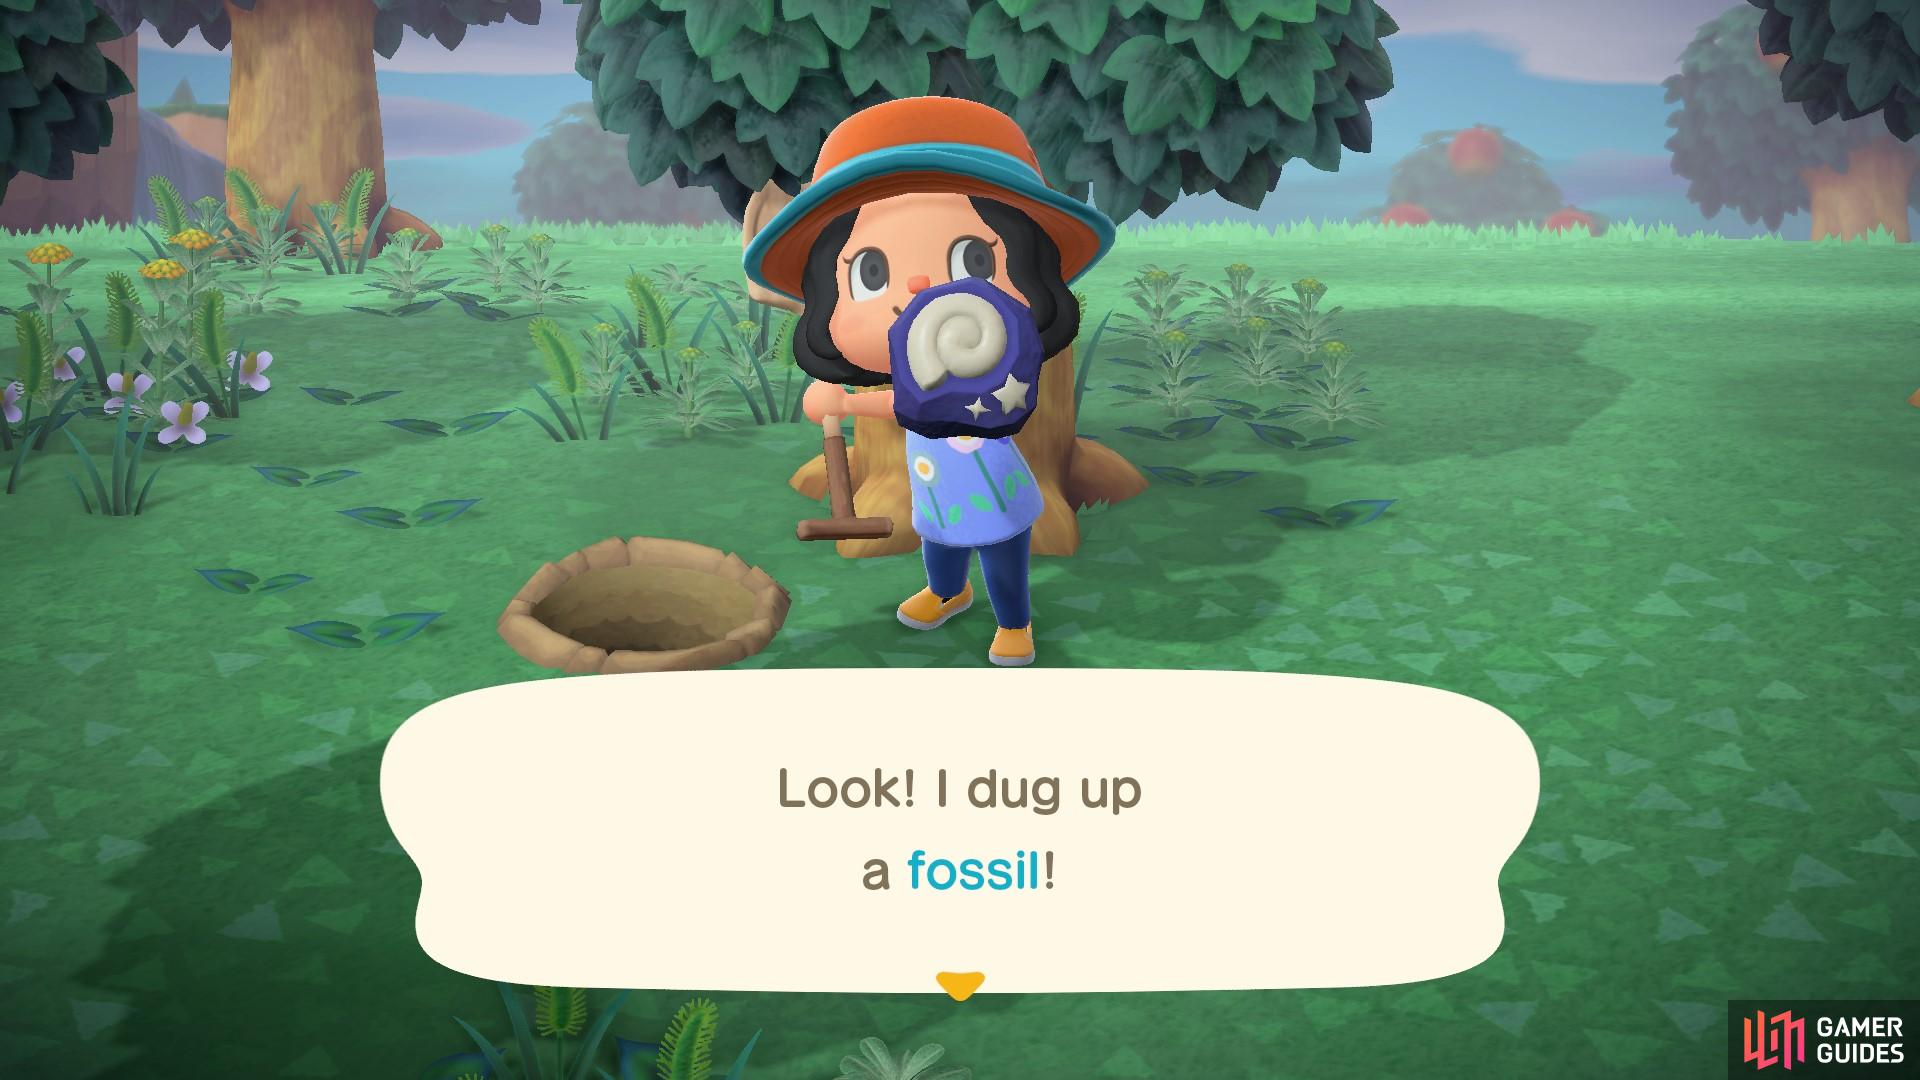 You'll need to get fossils assessed by Blathers in order to identify it.